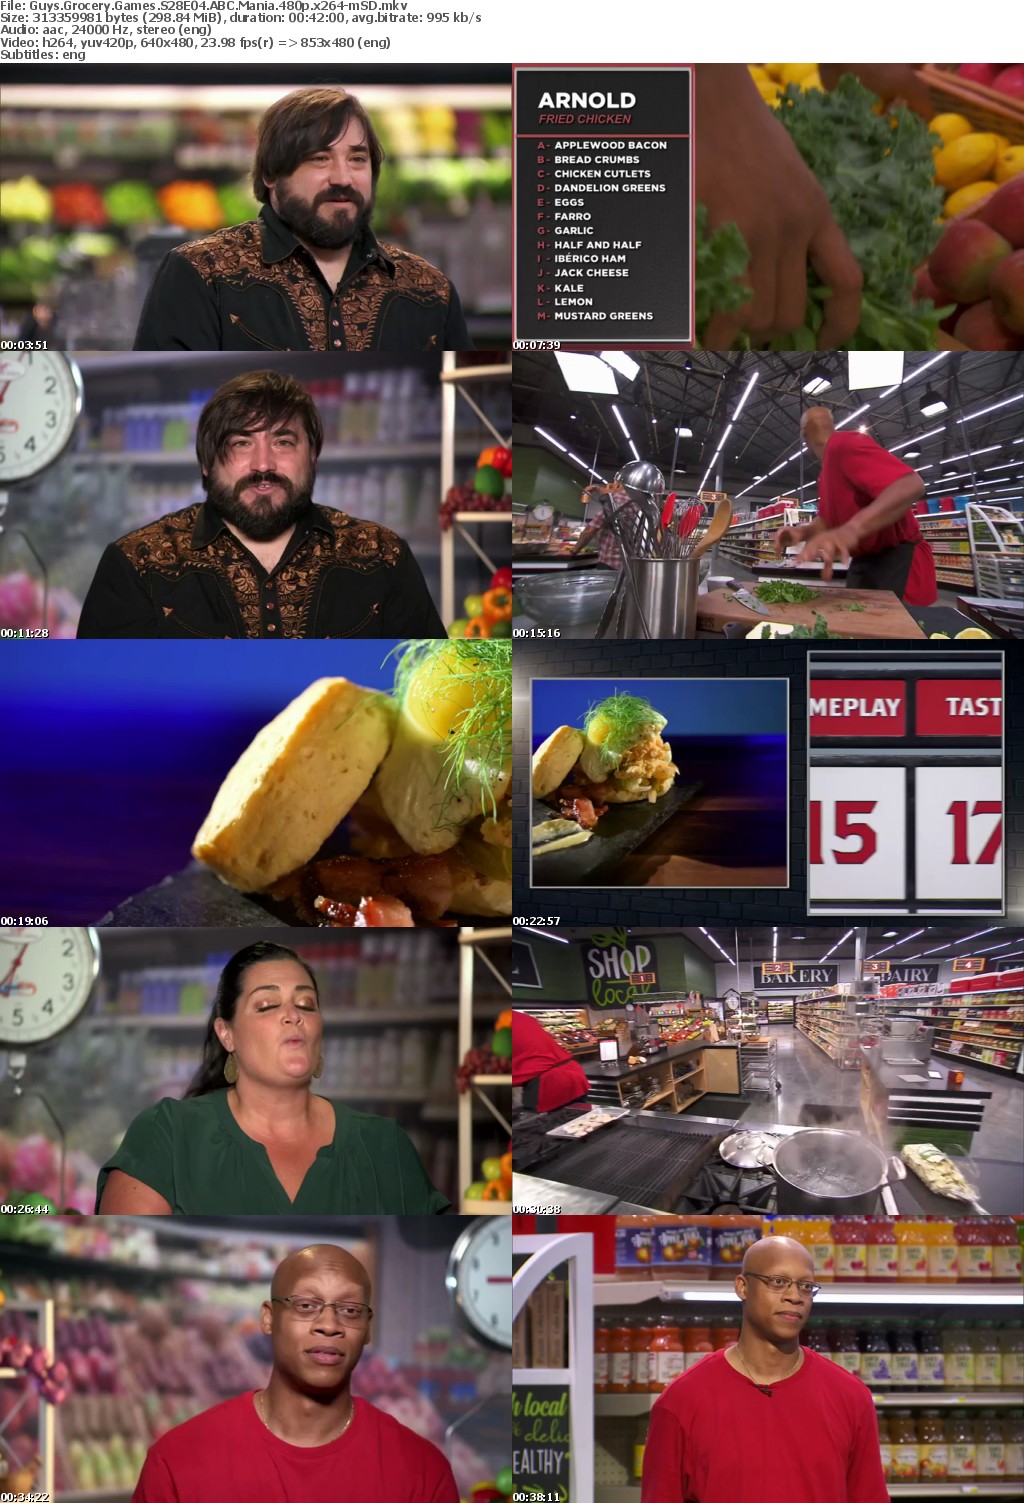 Guys Grocery Games S28E04 ABC Mania 480p x264-mSD